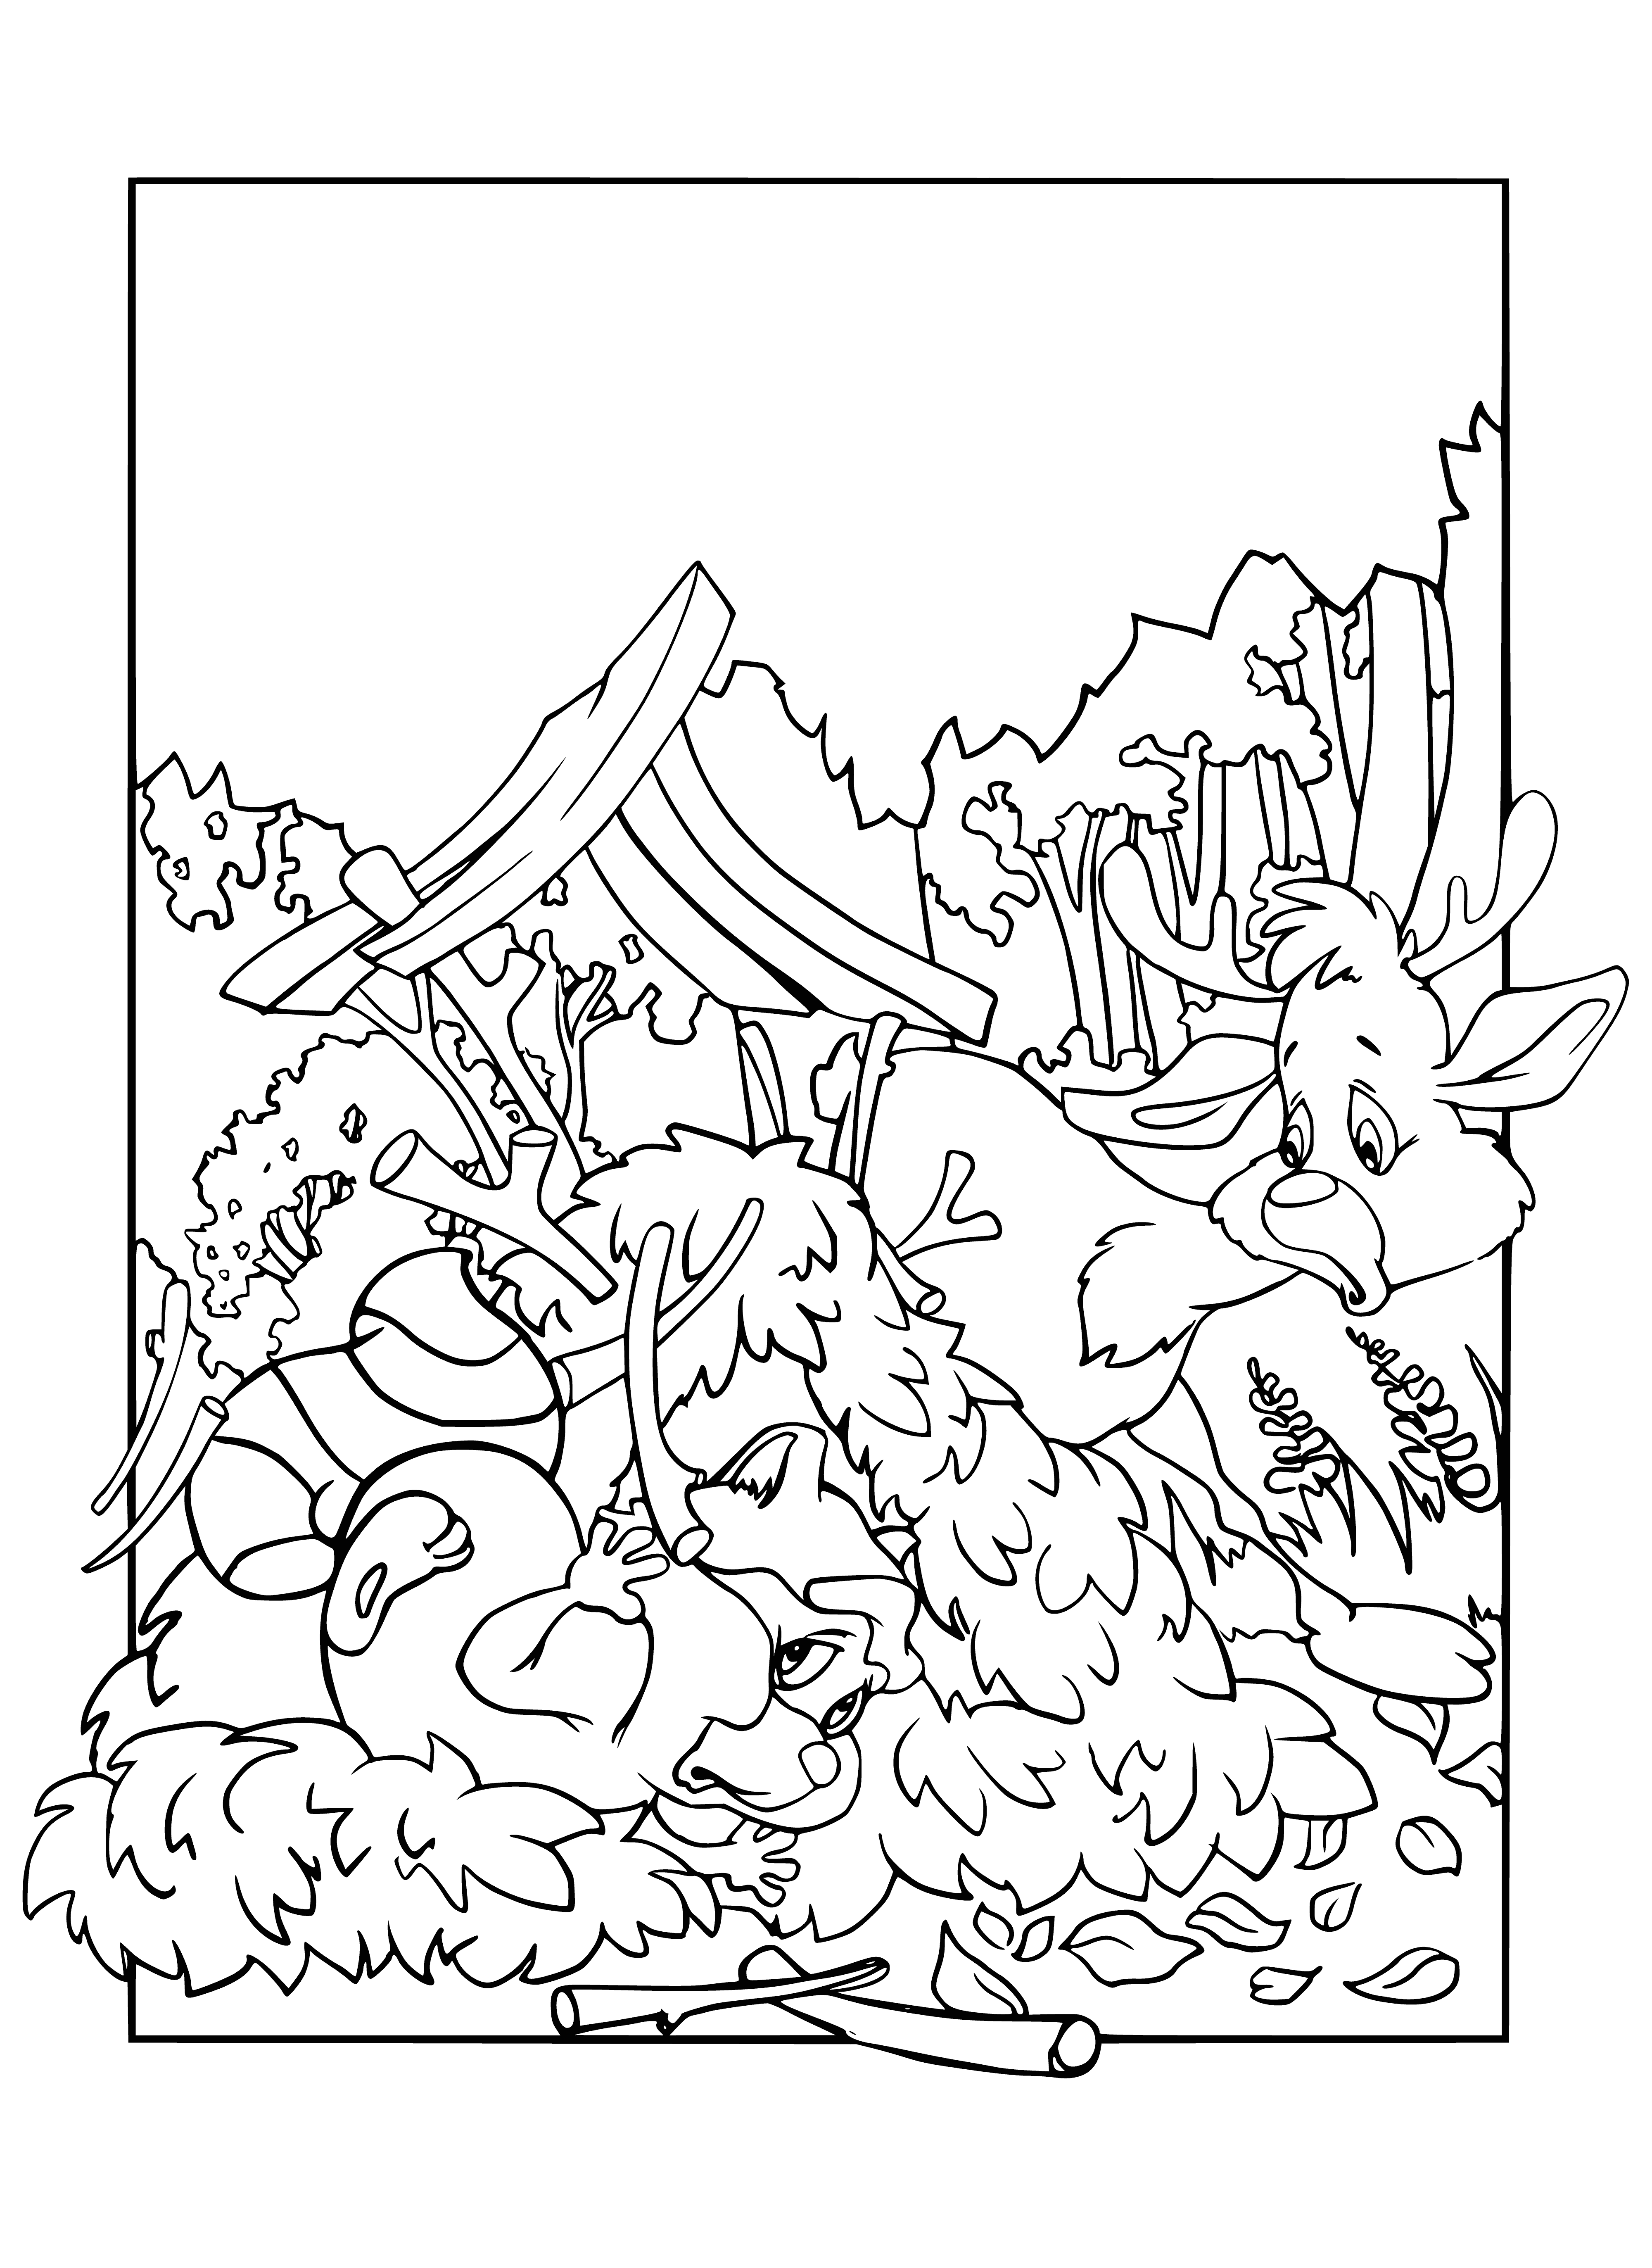 coloring page: Three kids smile happily: blonde Oreshenka, dark-haired boy and red-haired girl.